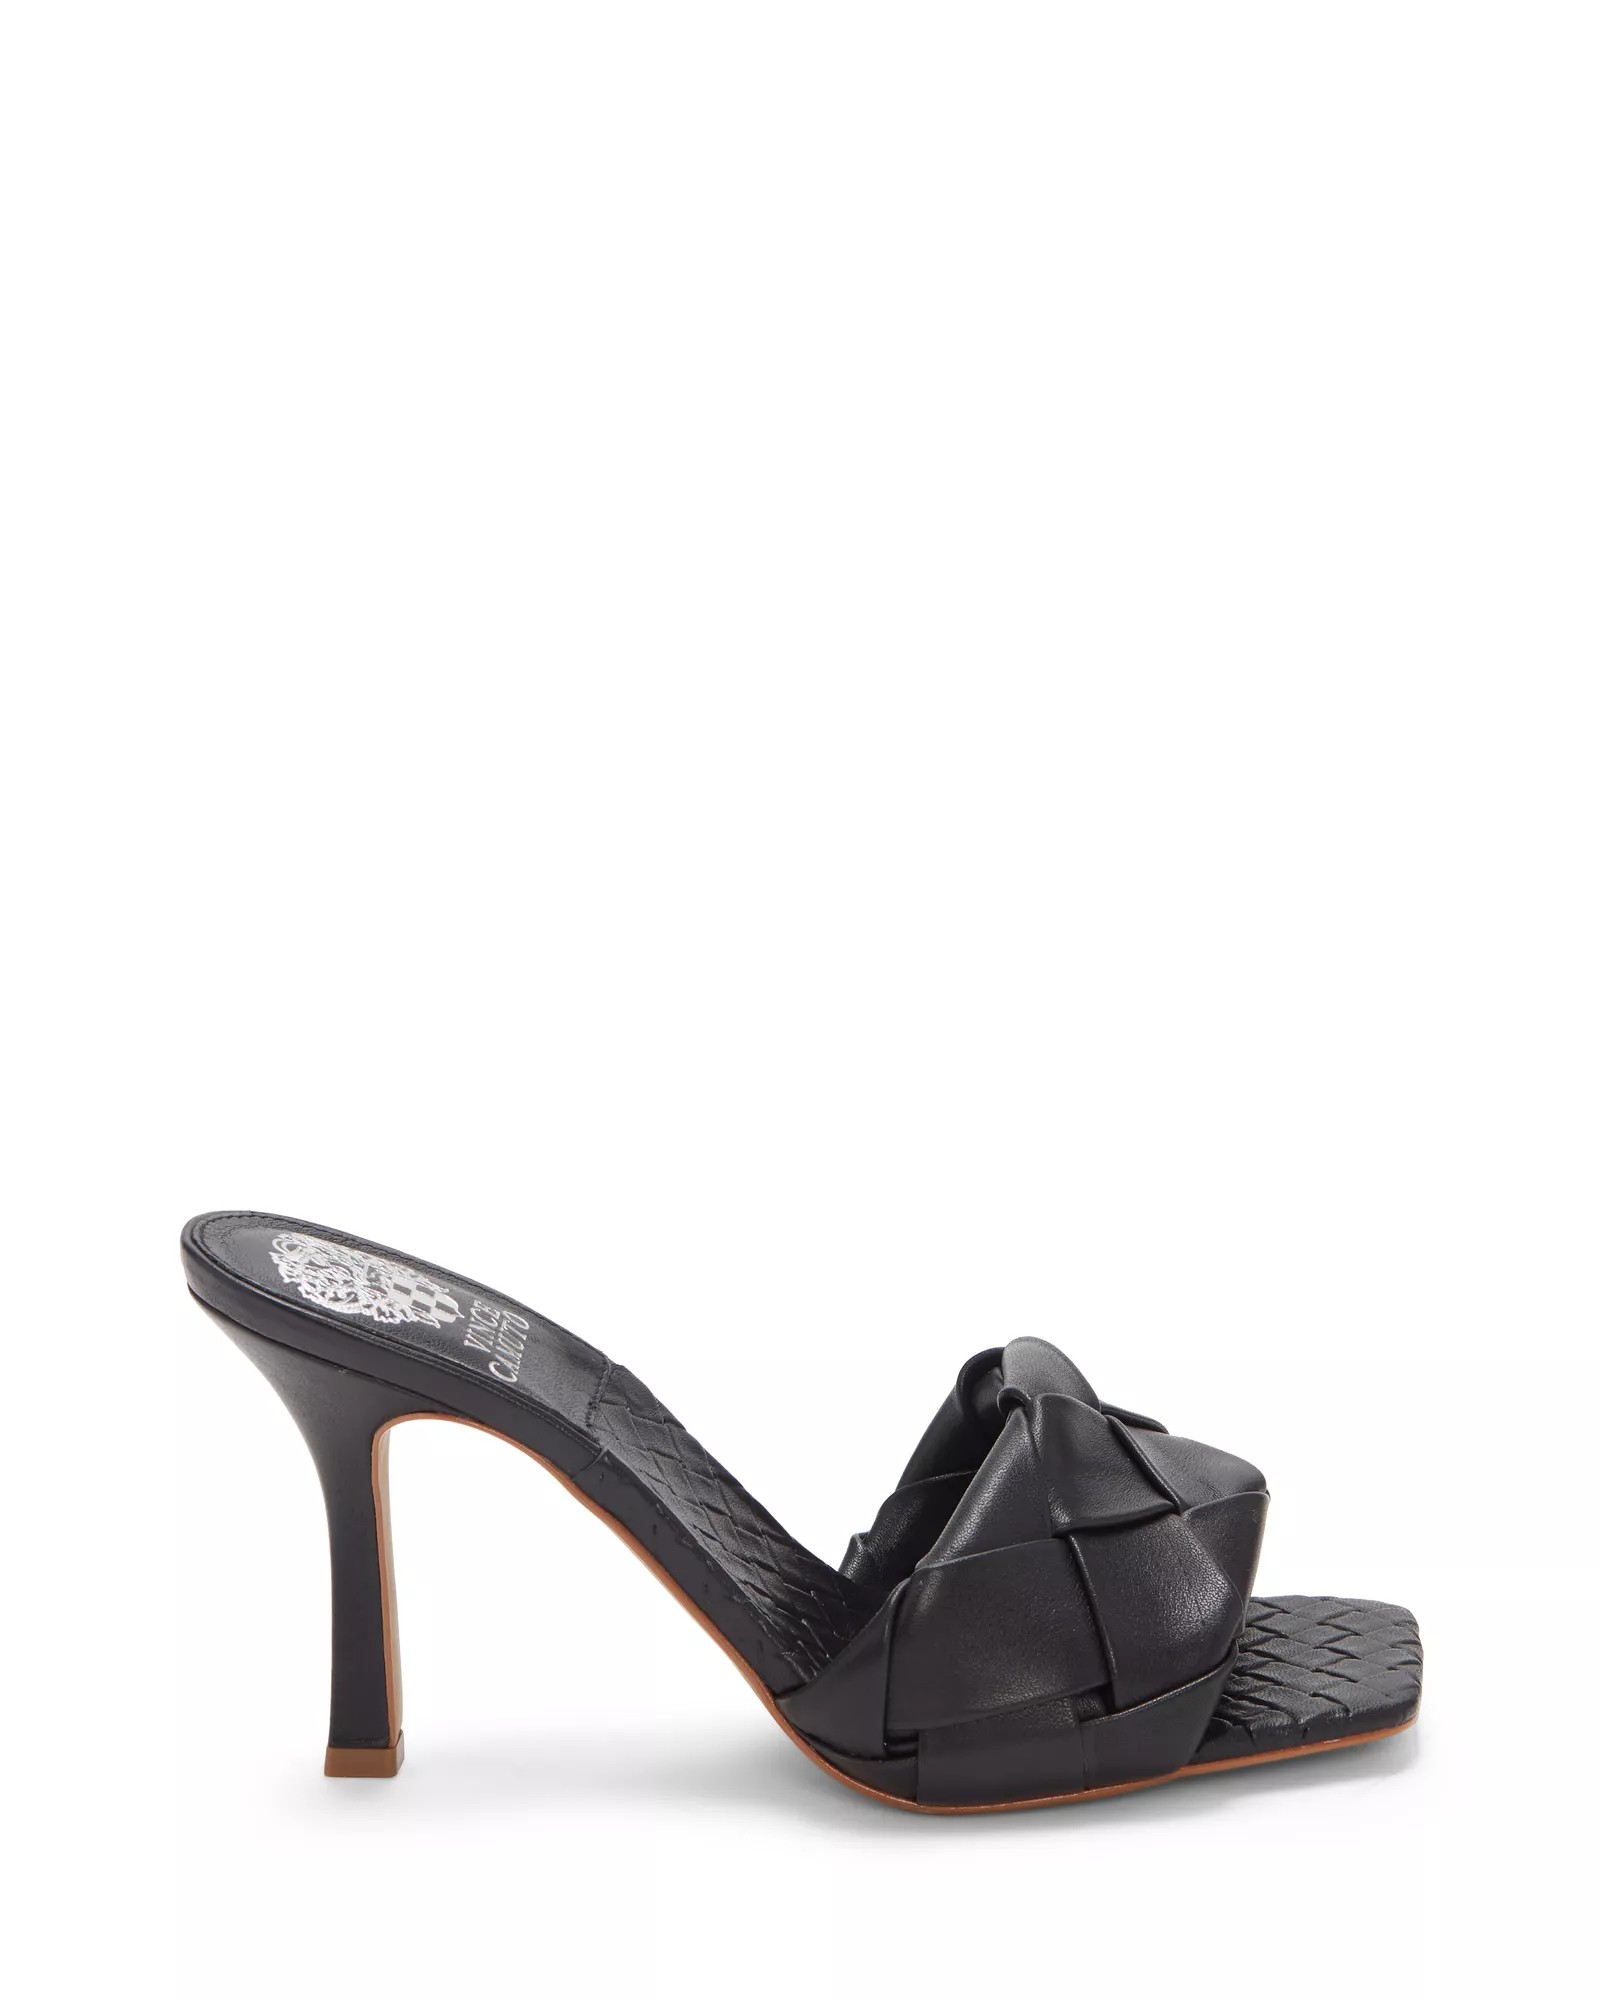 Vince Camuto Brelanie Woven-Strap Mule - Excluded from Promotions ...